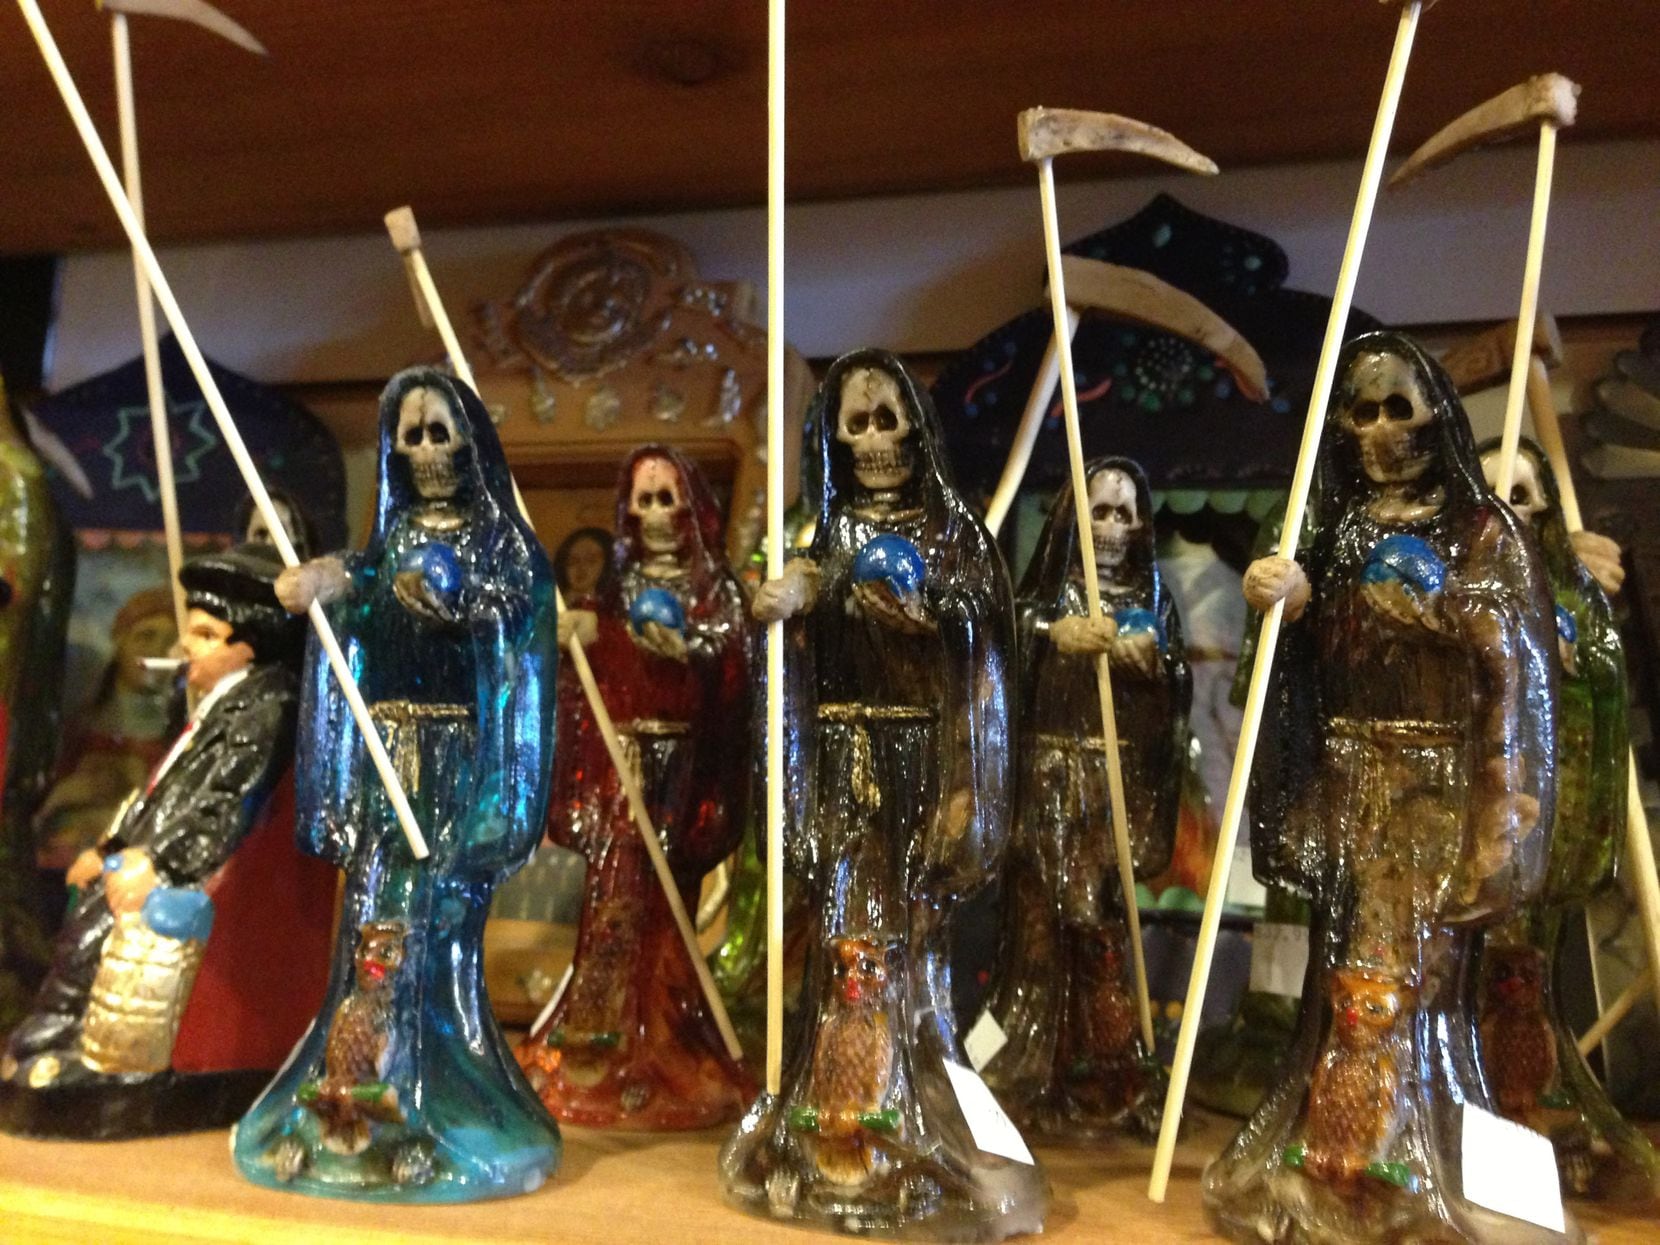 In this file photo, statues of Santa Muerte are shown at a store in Albuquerque, N.M. La...